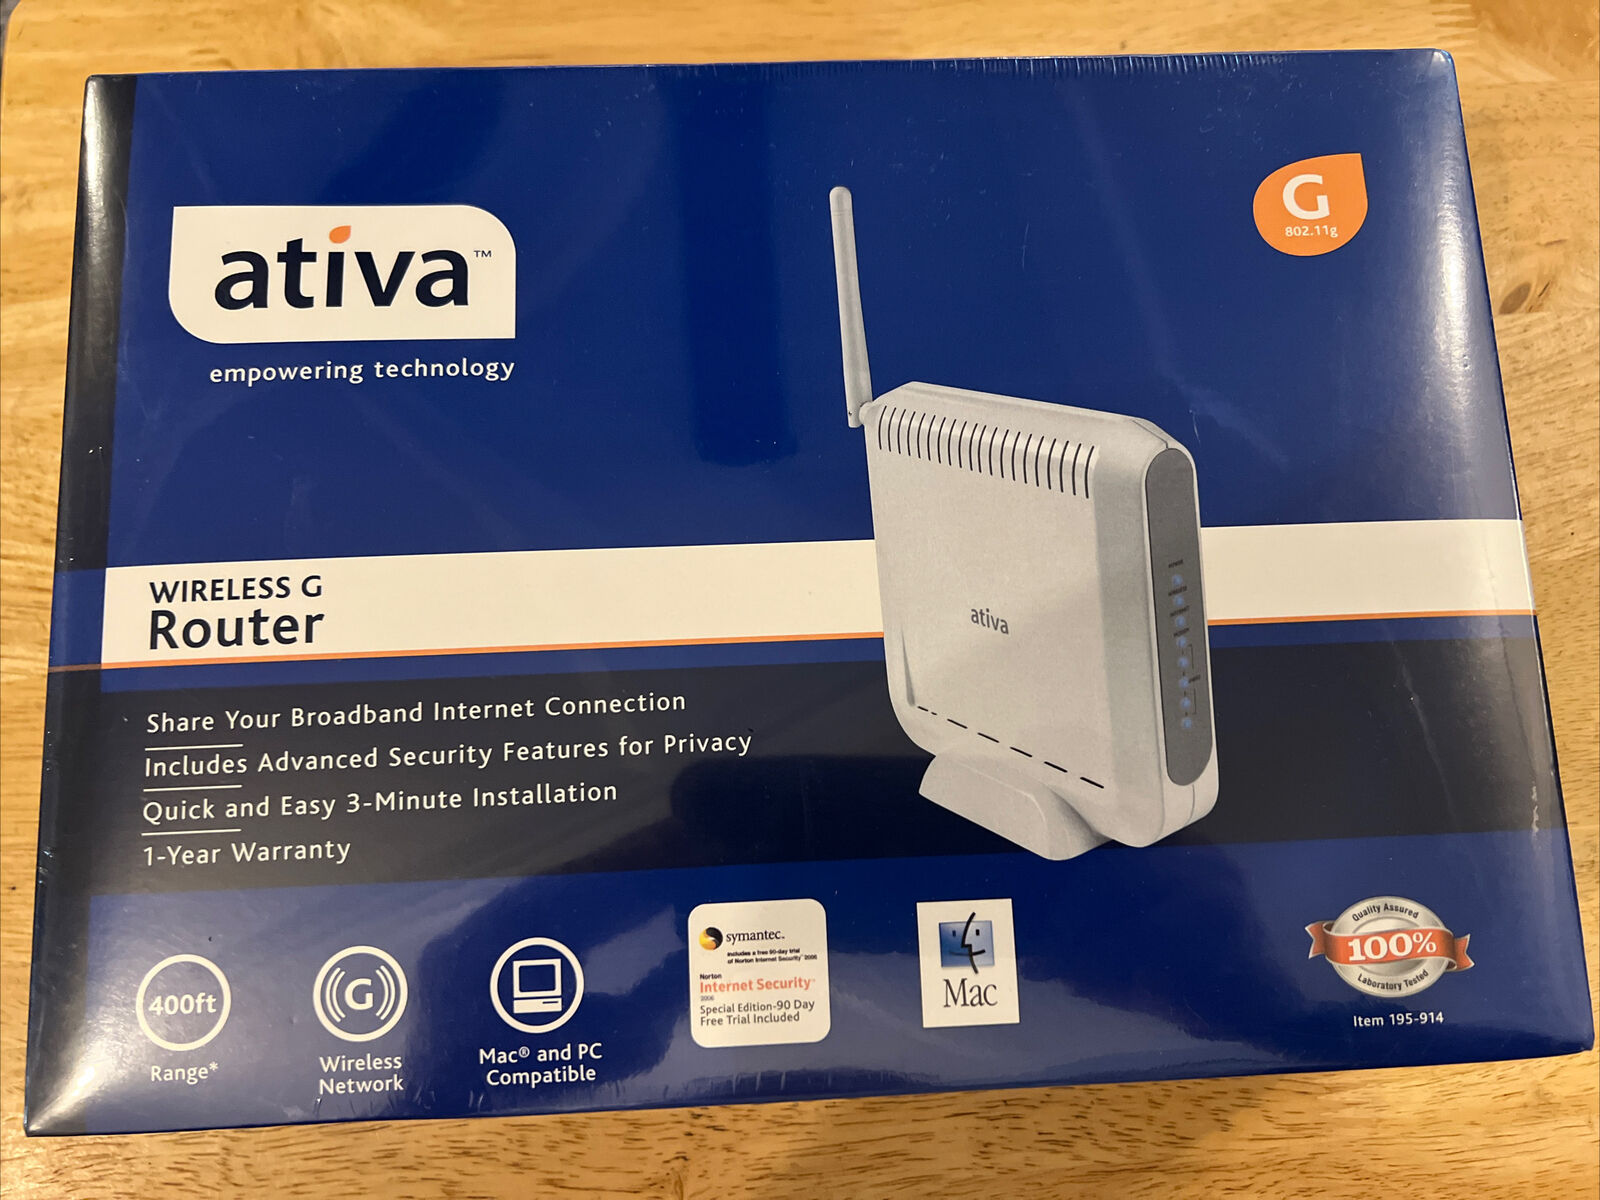 Ativa Wireless G Router 400 ft range AWGR54 NEW IN BOX FACTORY SEALED